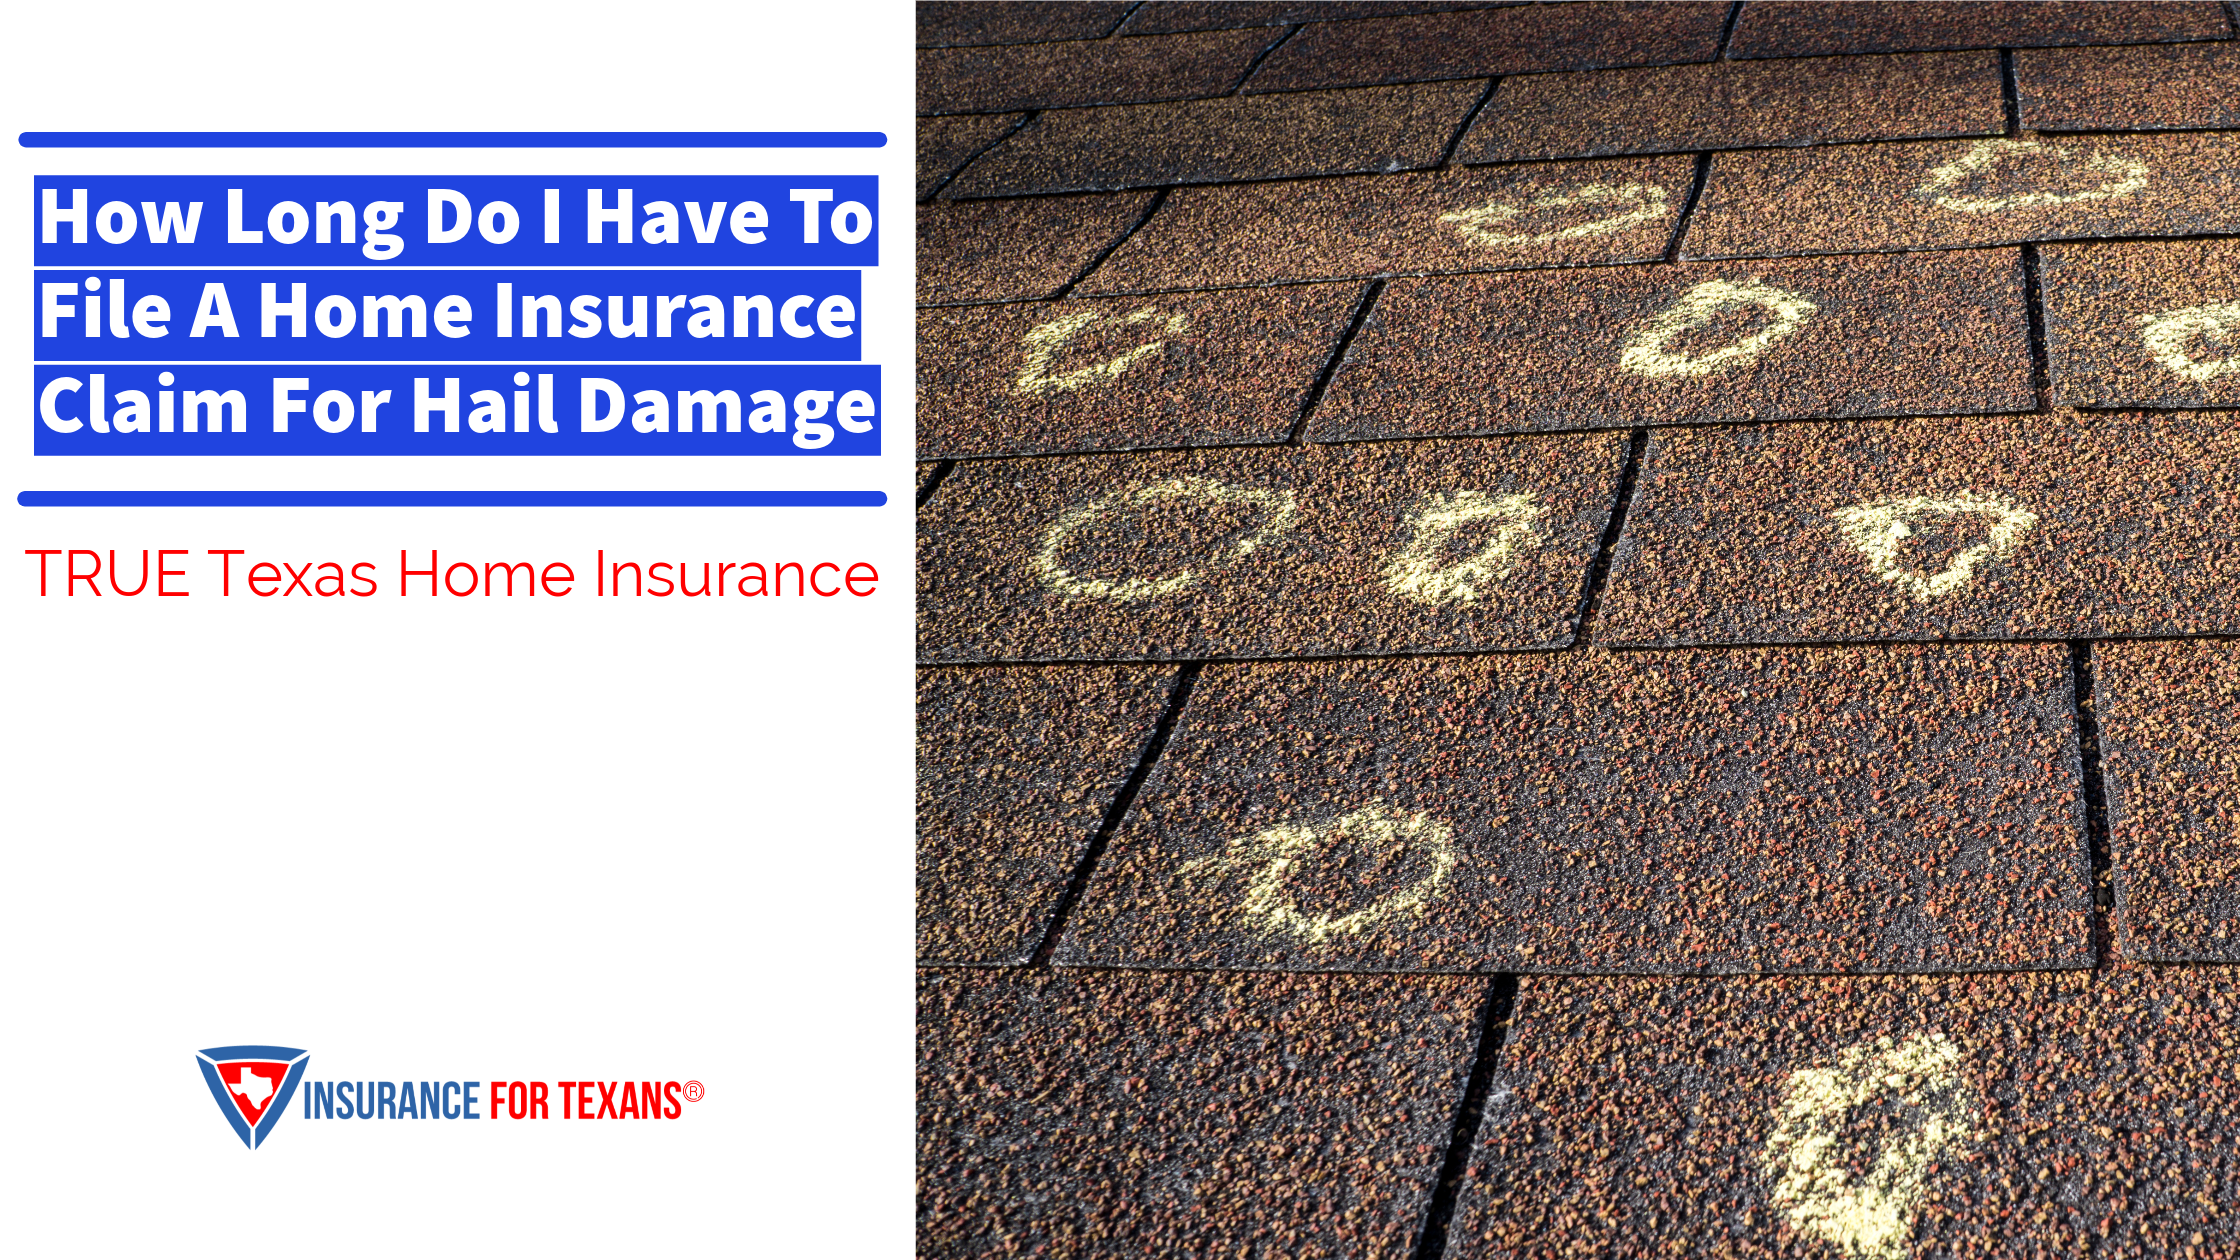 How Long Do I Have To File A Home Insurance Claim For Hail Damage?